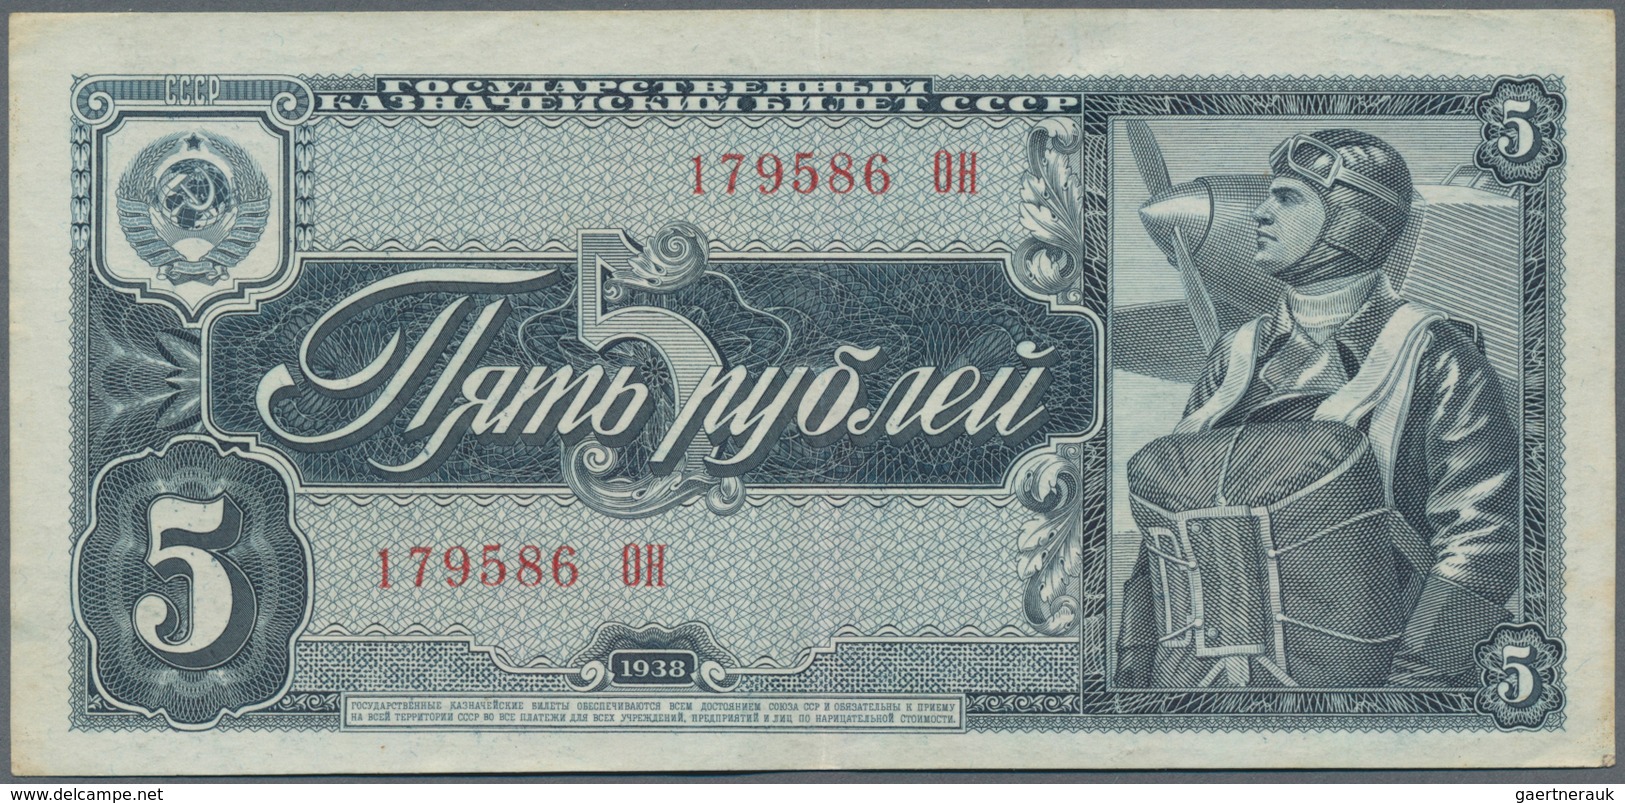 Russia / Russland: Lot with 10 Banknotes comprising 1 Gold Ruble 1928 in F+, 2 x 1, 2 x 3 and 2 x 5